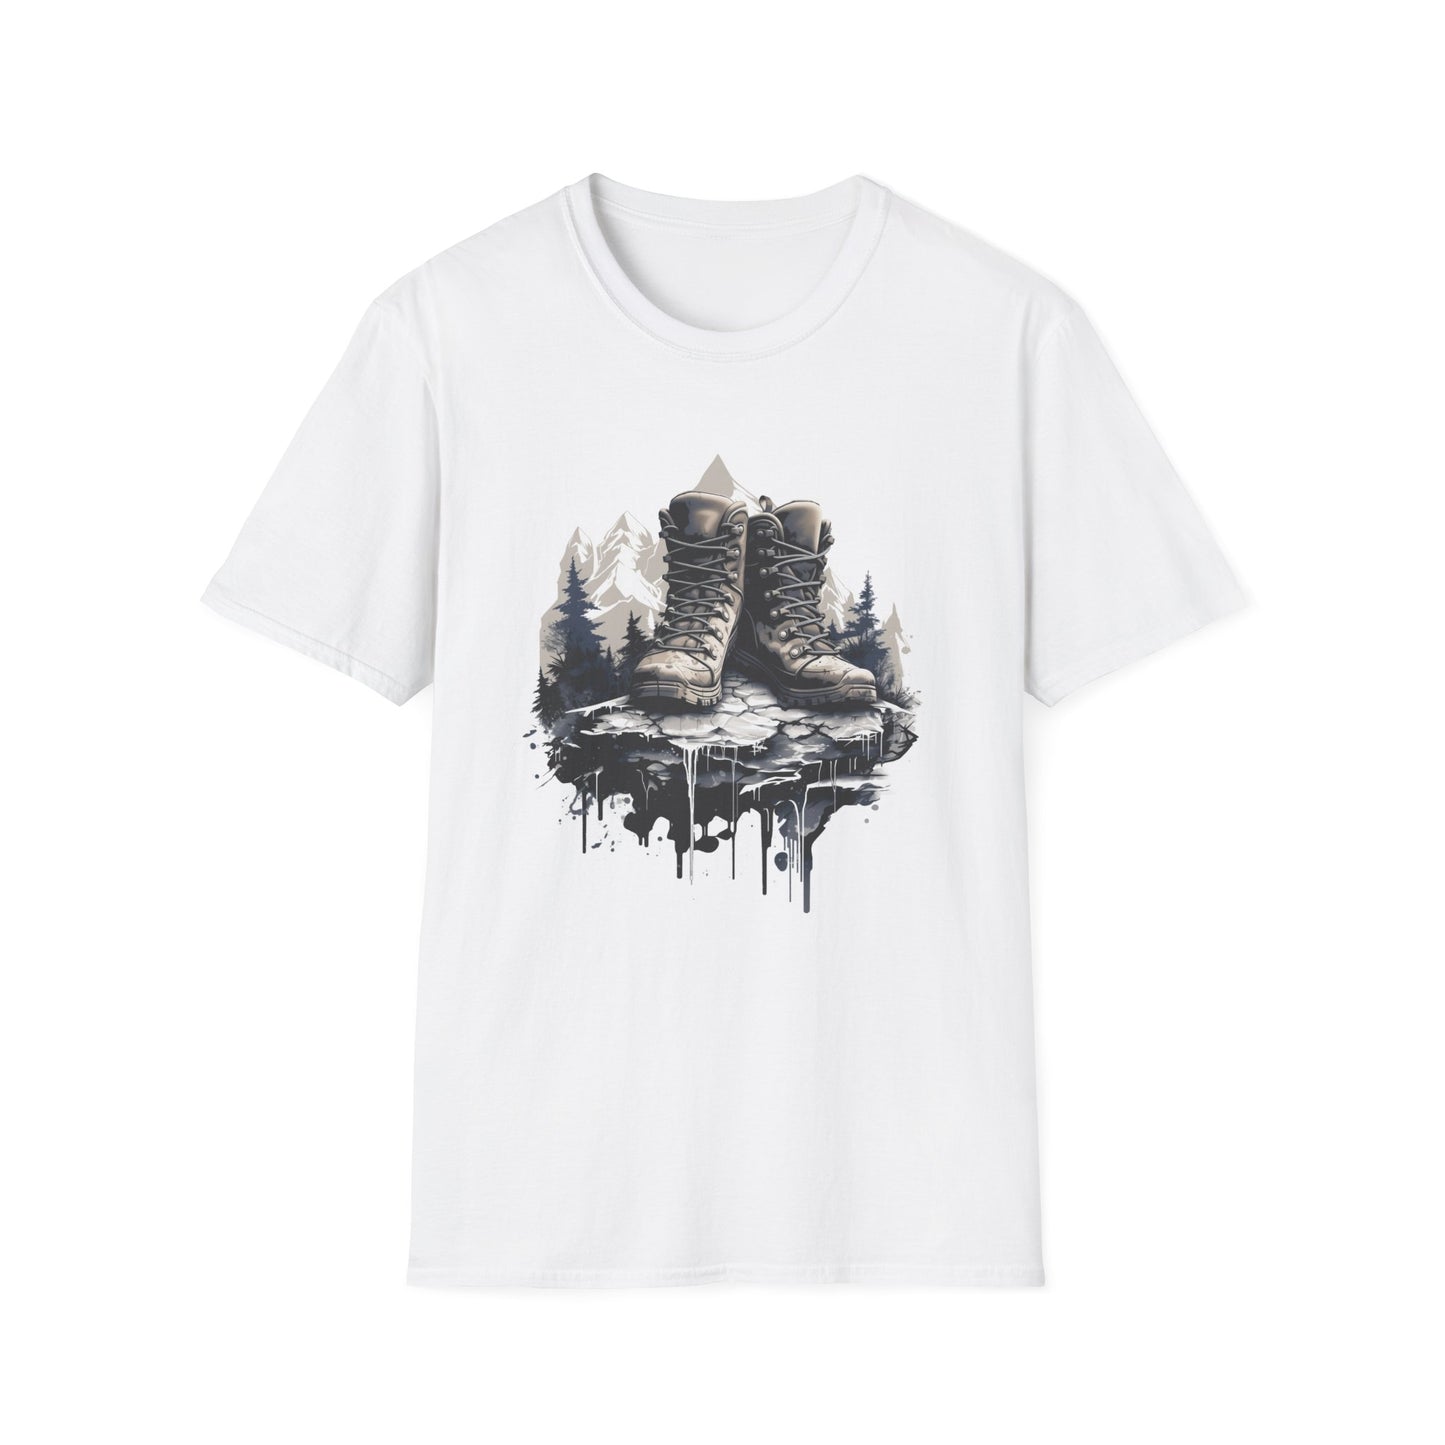 "HKNG BTS" Men's Softstyle T-Shirt